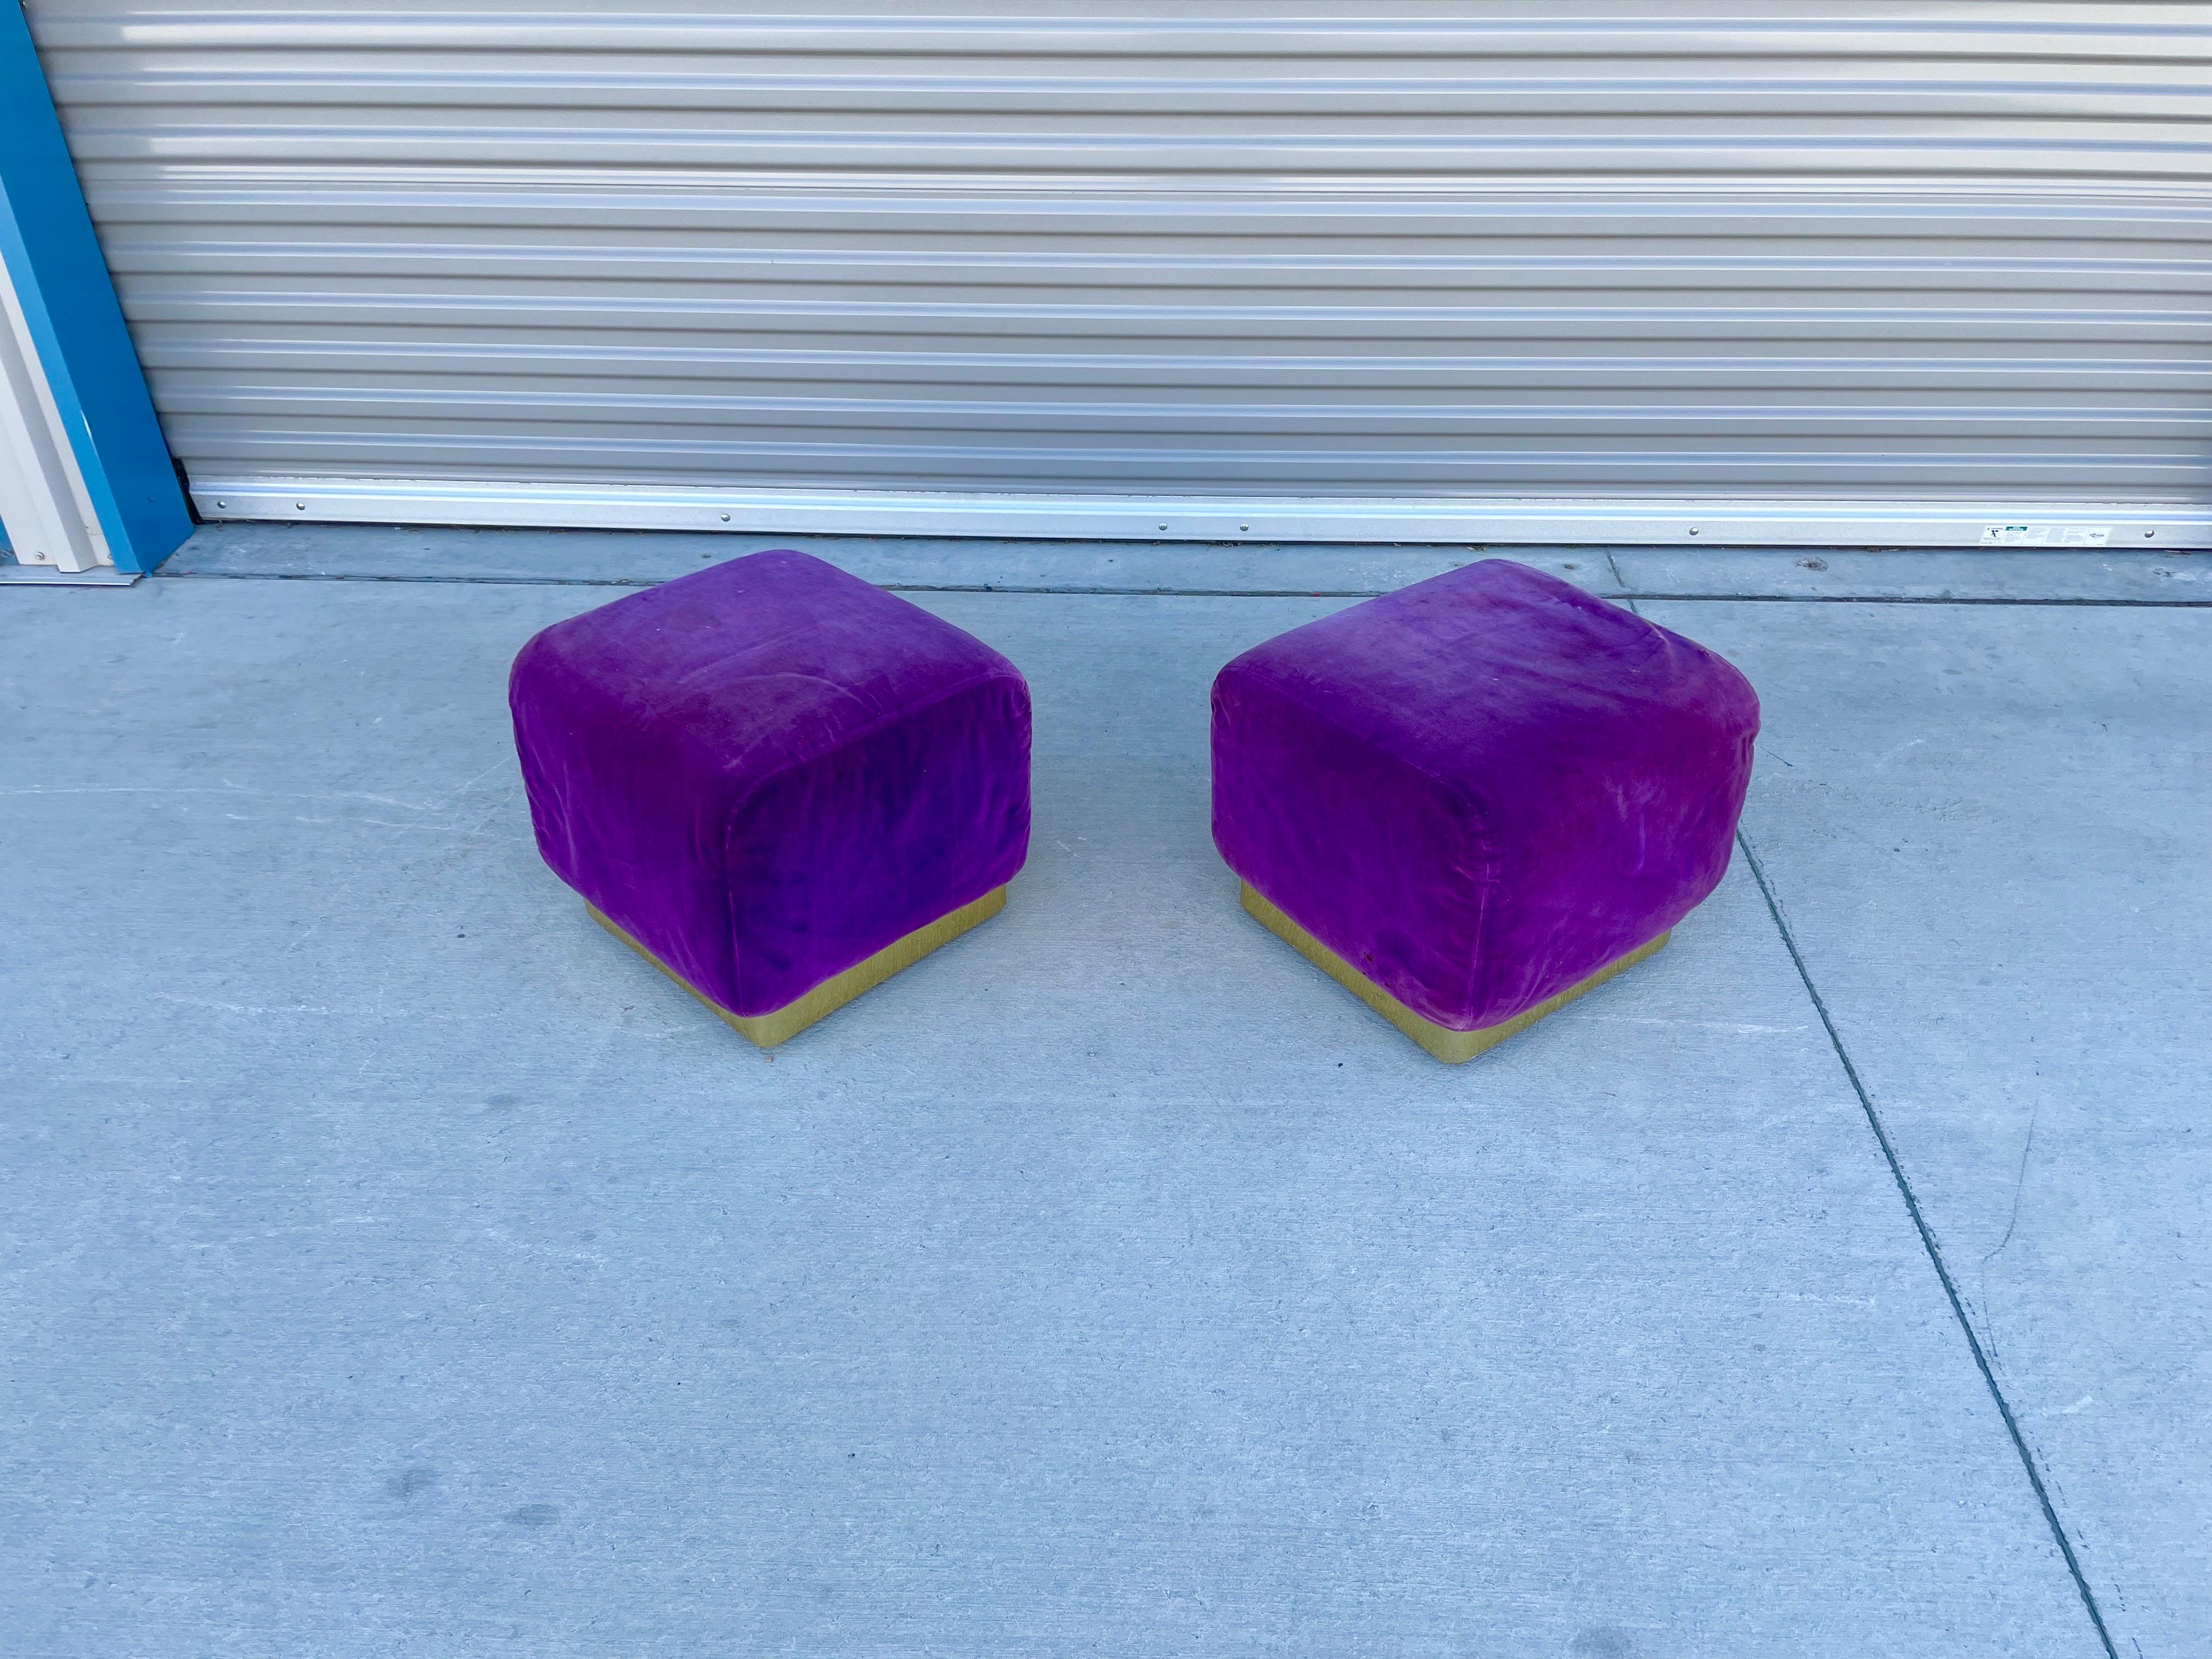 Midcentury pair of square shape brass ottomans. This pair of ottomans features a square shape design making them comfortable with a brass base, making them sturdy. The upholstery does need to be reupholstered, letting you make them the perfect